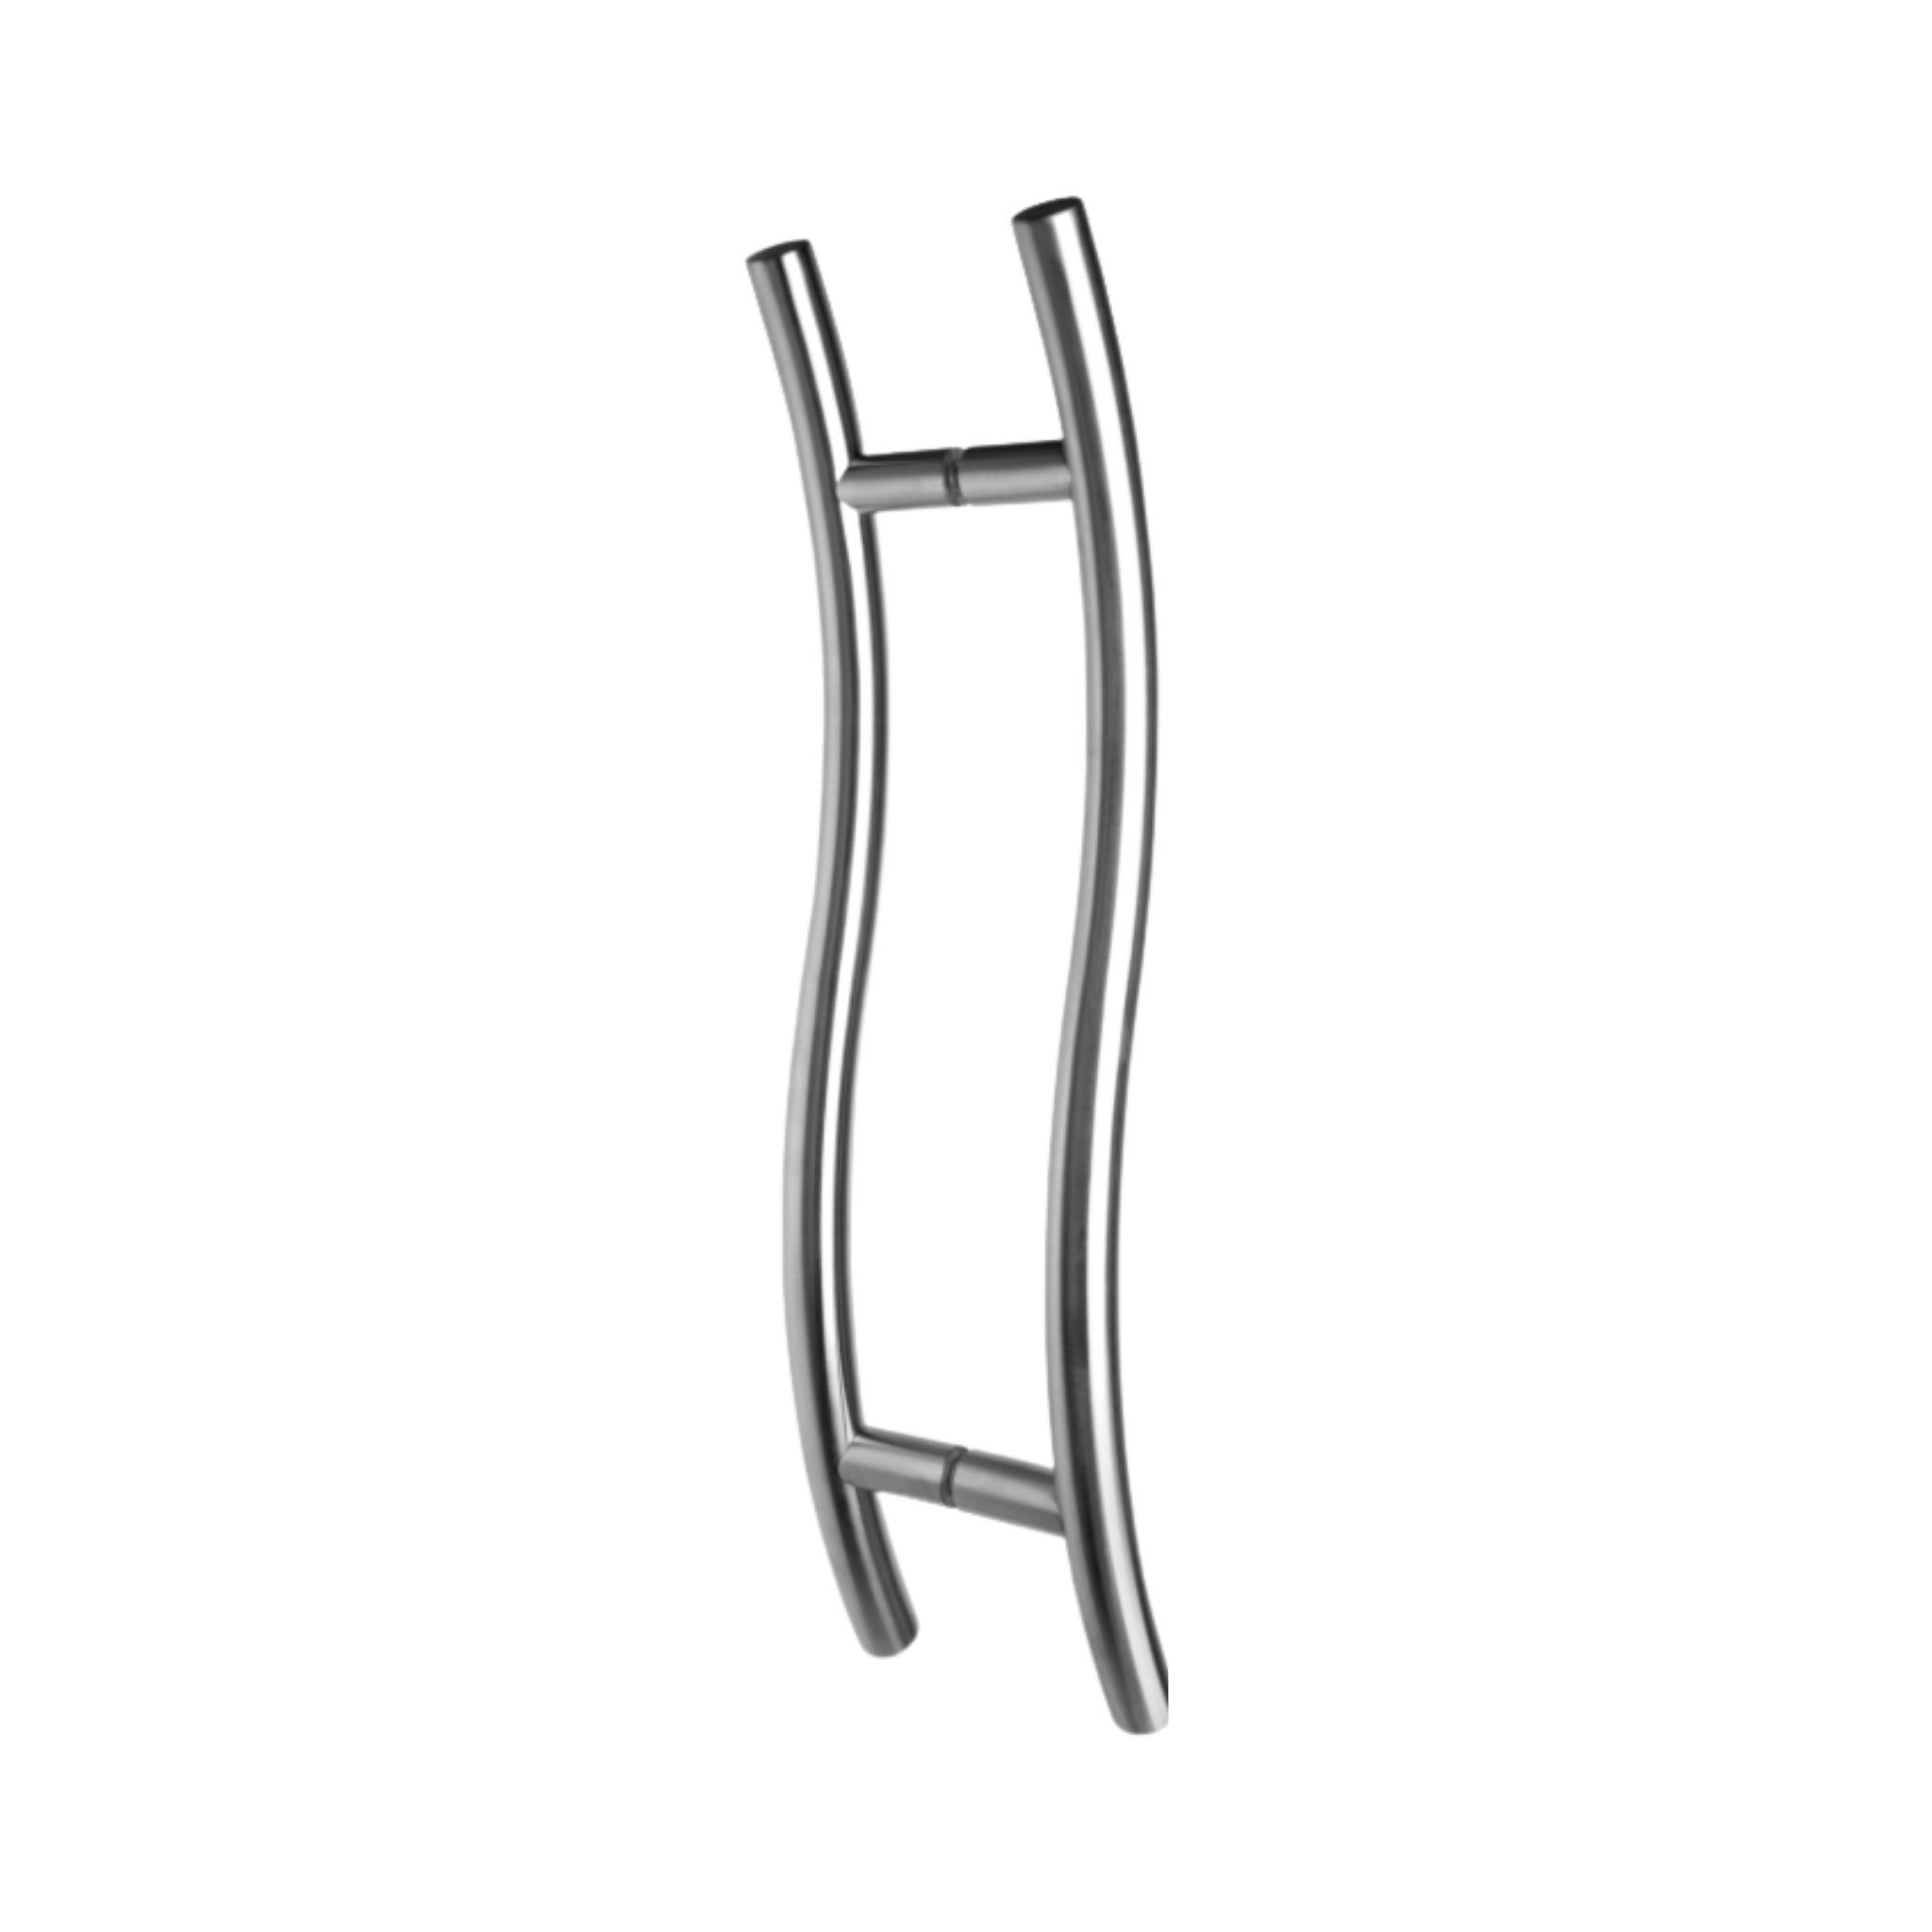 QS2902 S Handle, Pull Handle, Round, S Handle, BTB, 30mm (Ø) x 600mm (l) x 400mm (ctc), Stainless Steel, QS